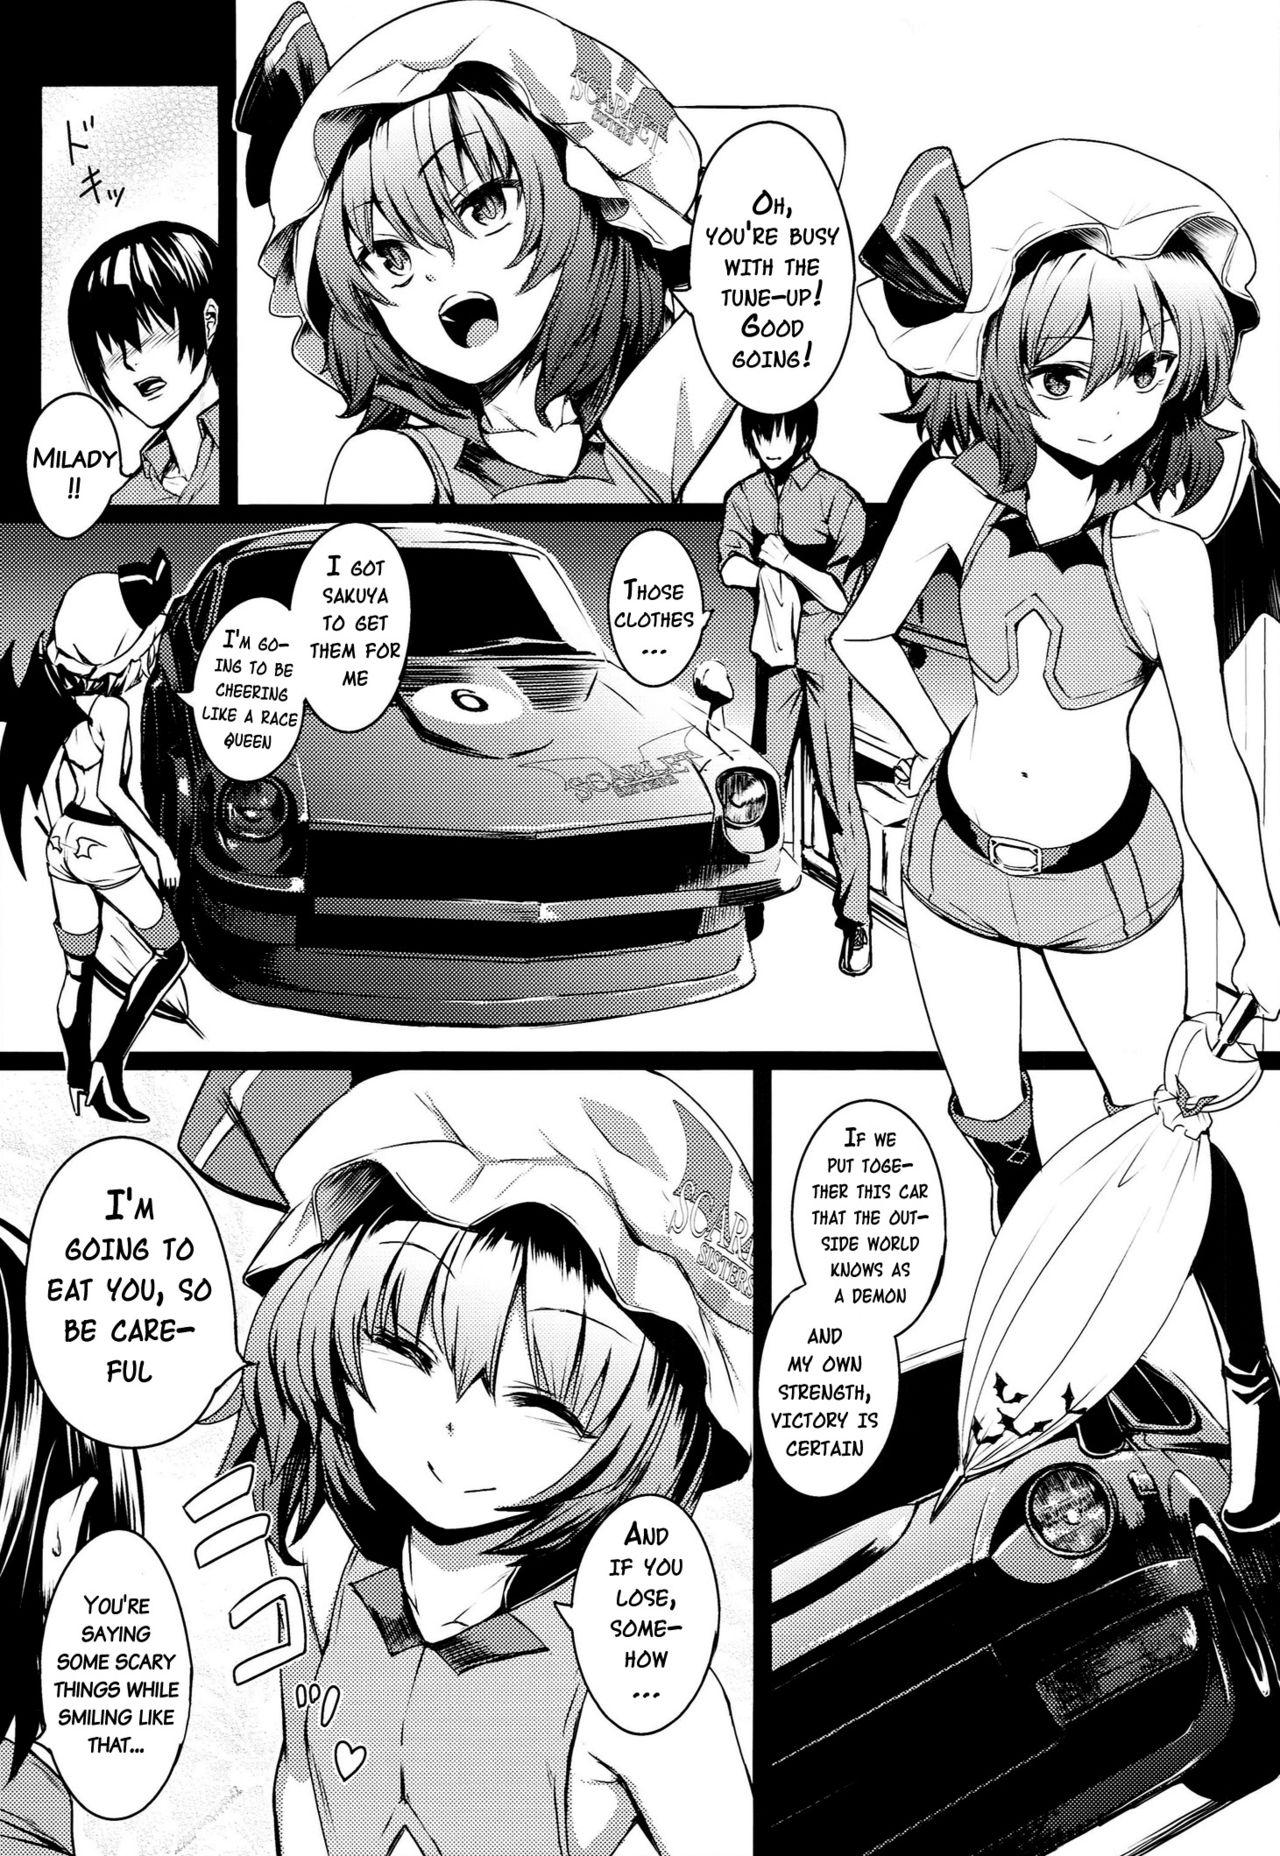 Mum TOUHOU RACE QUEENS COLLABO CLUB - Touhou project Gay Bukkakeboys - Page 4